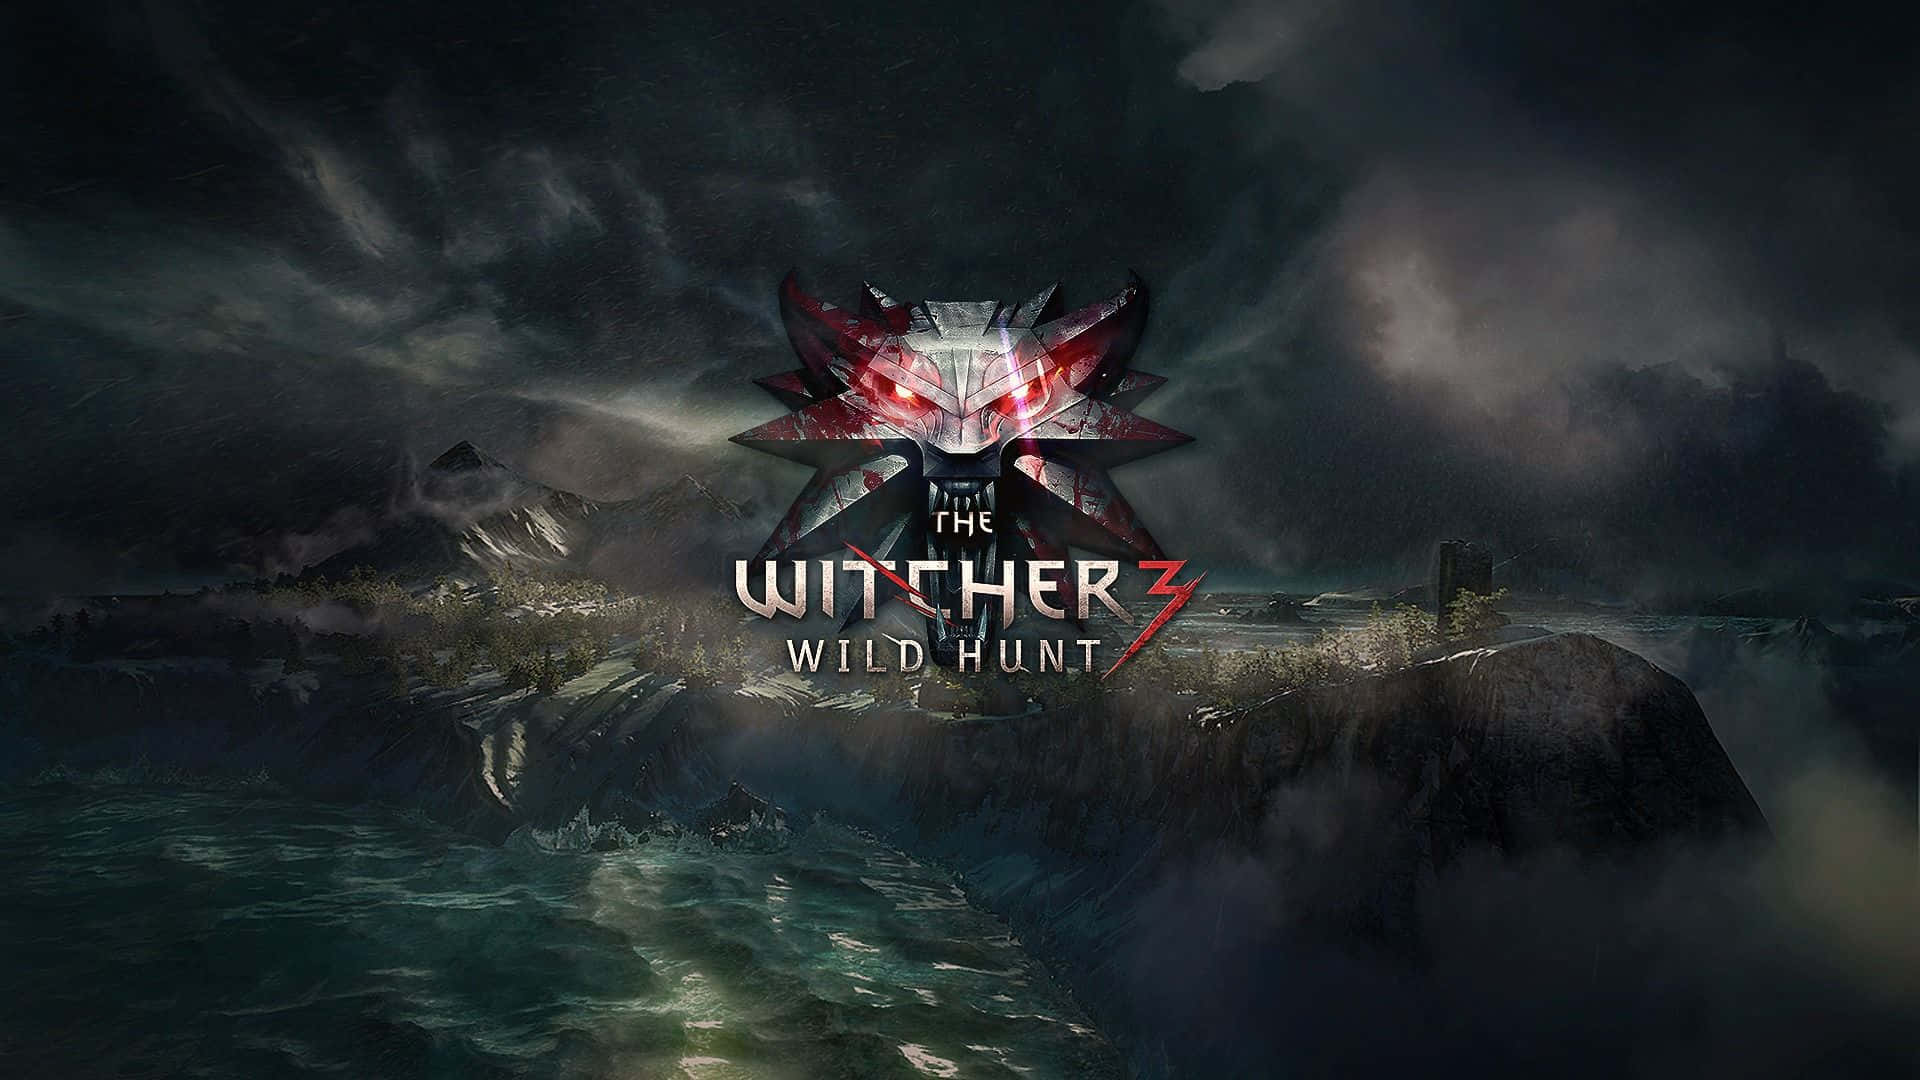 The Witcher 1920x1080 Wallpaper